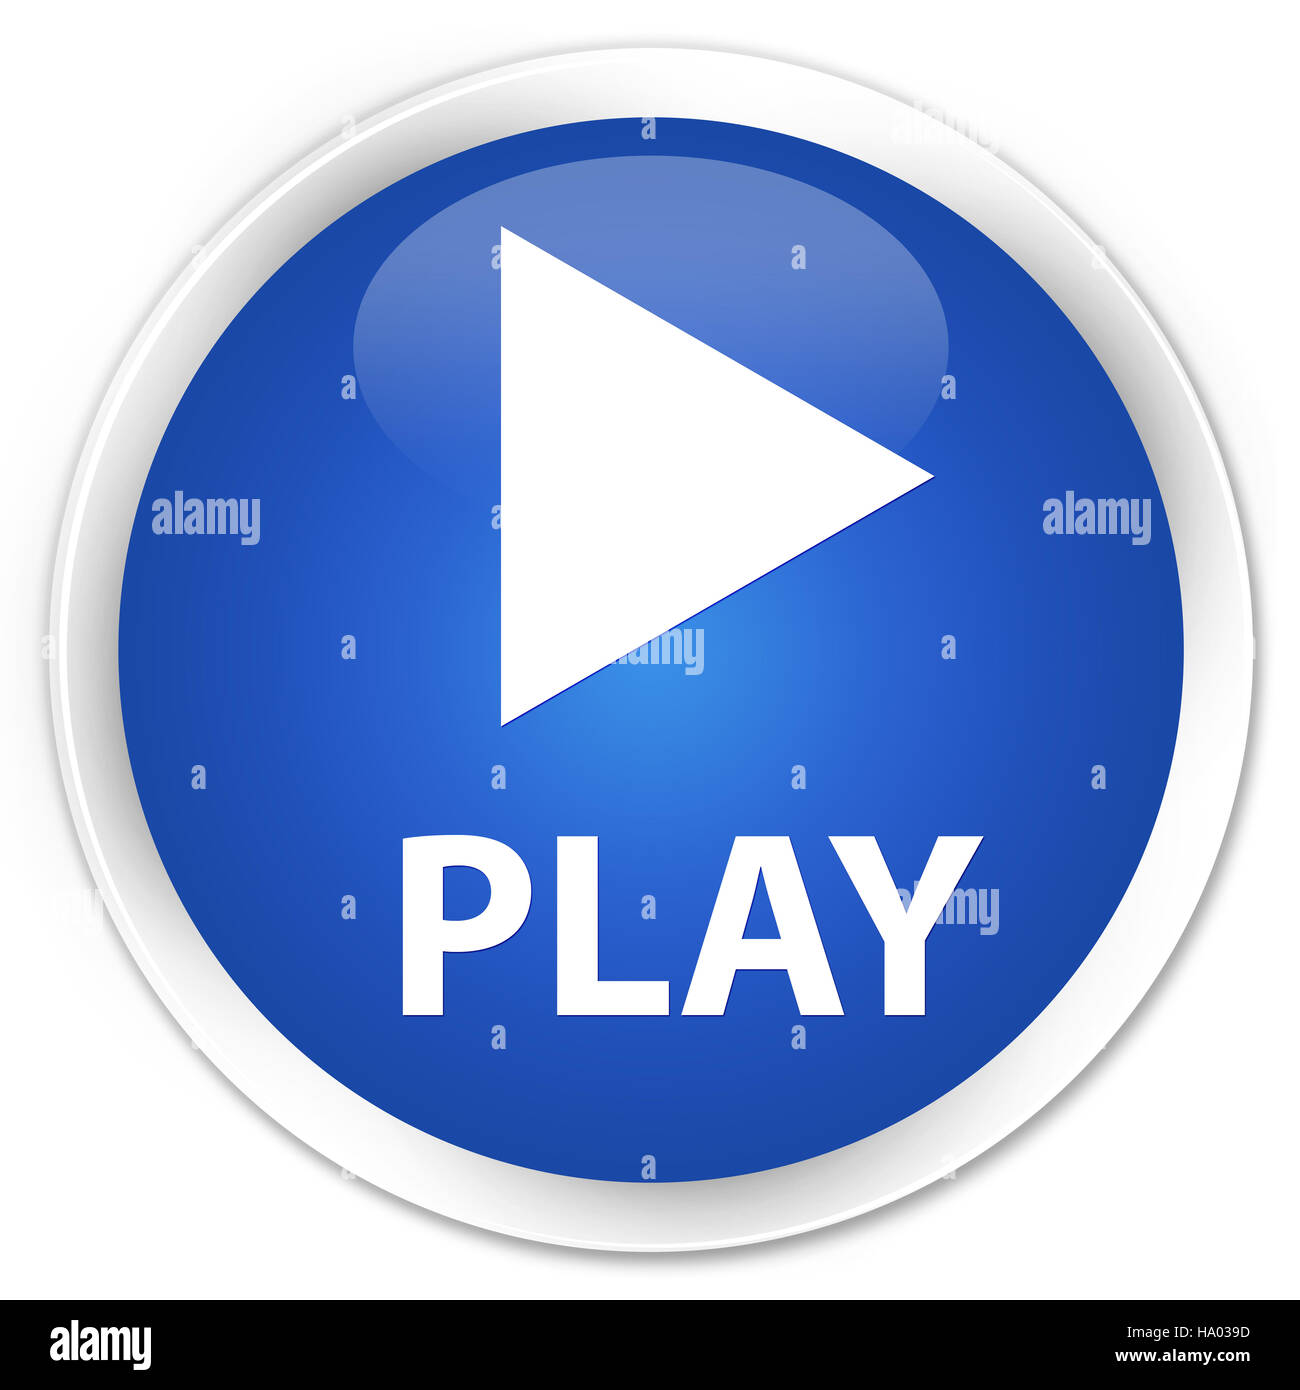 Play isolated on premium blue round button abstract illustration Stock Photo